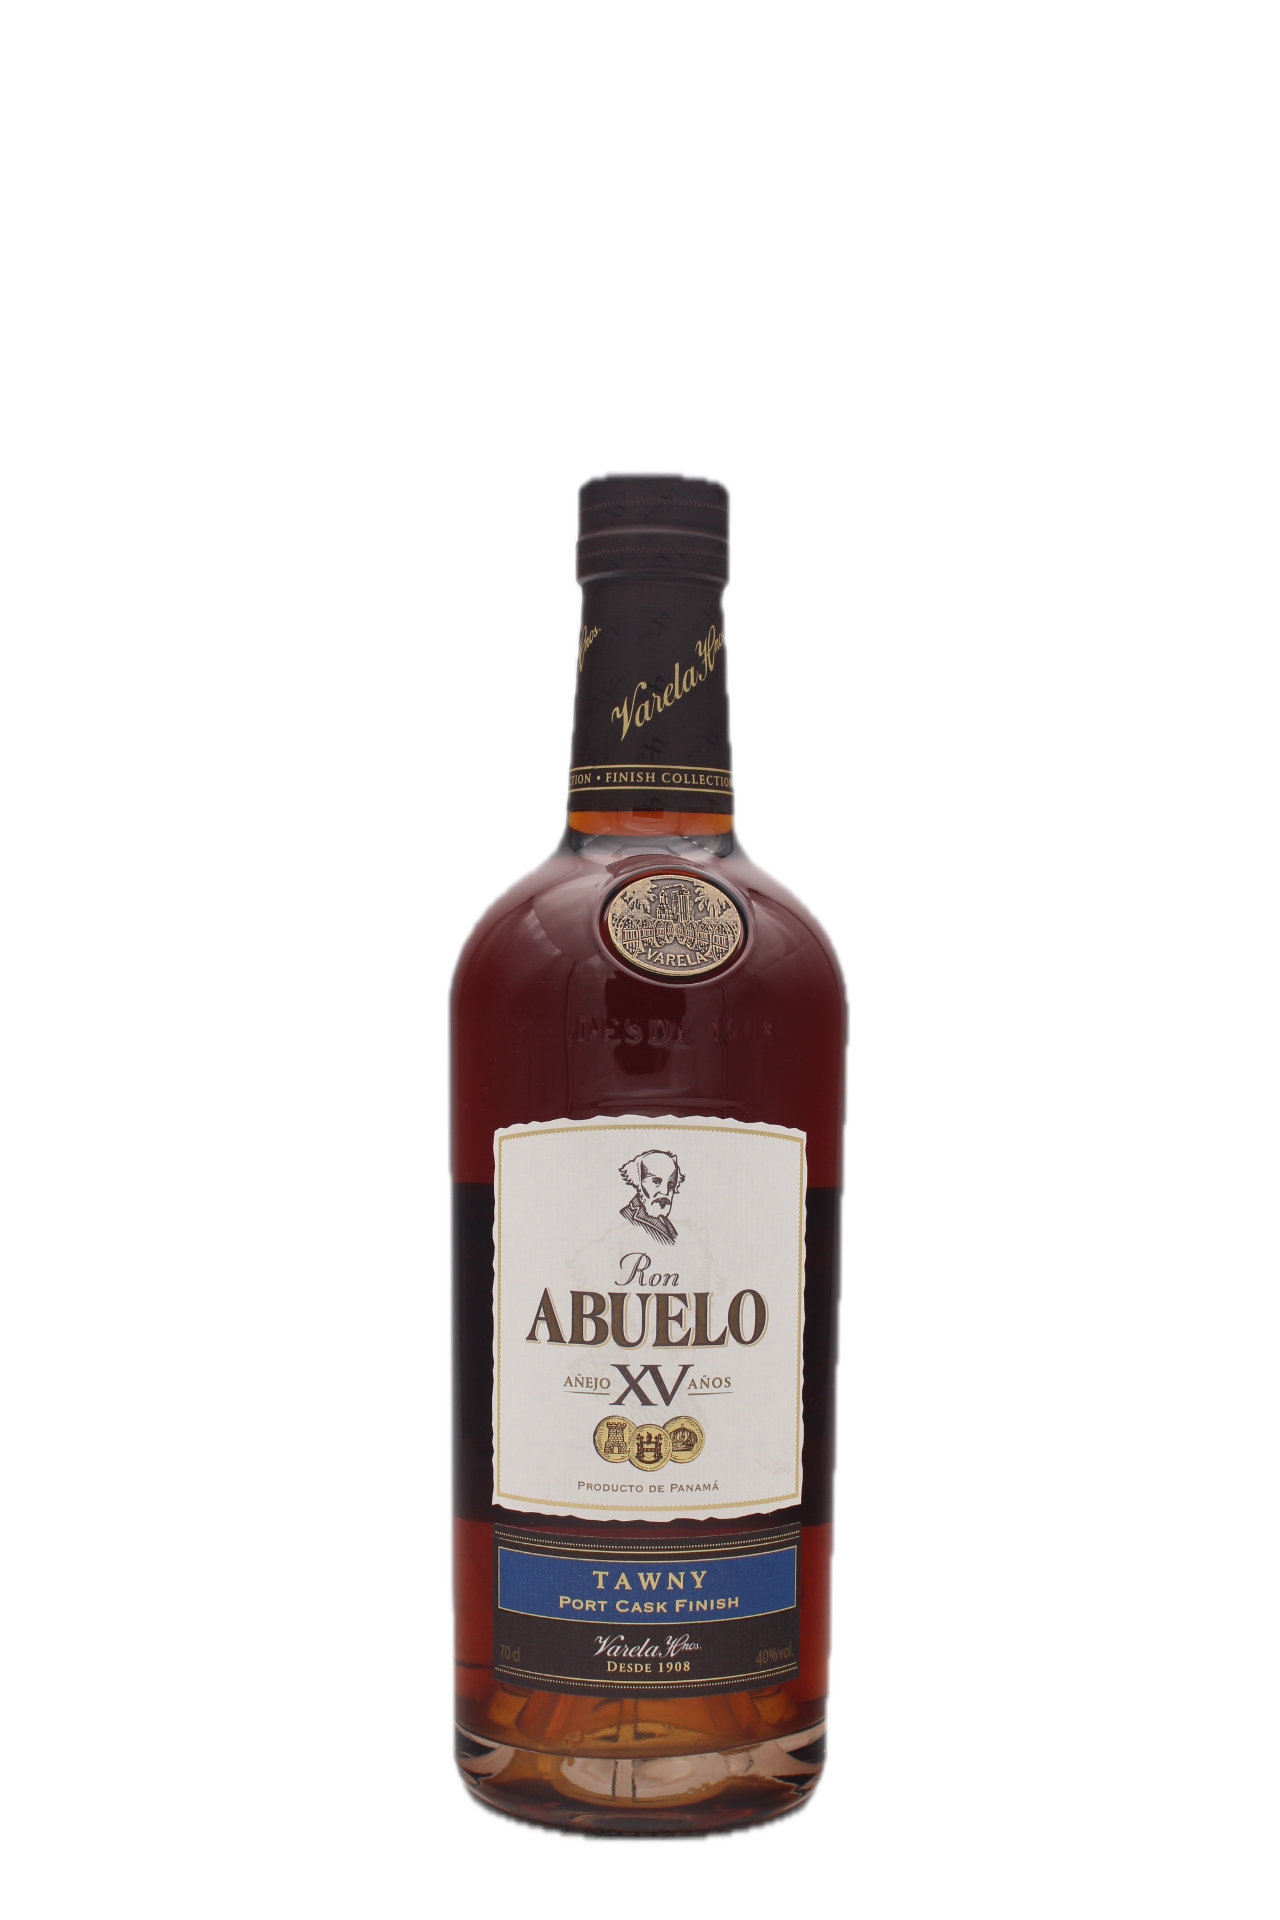 Abuelo Ron - 15 years Tawny Port Cask Finish